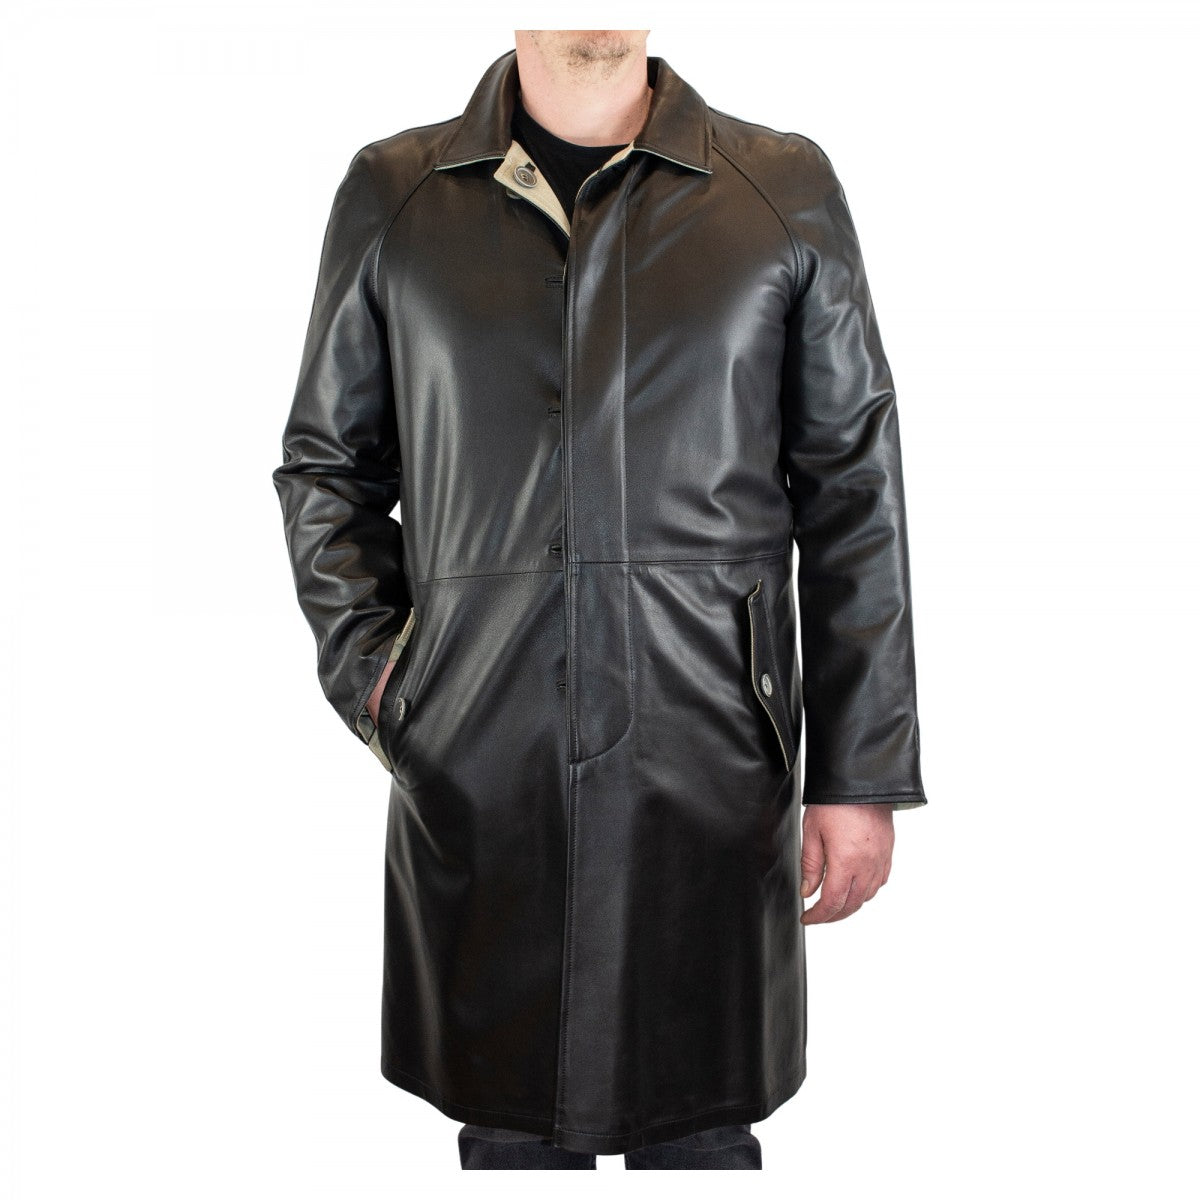 Long reversible jacket for men in black LEATHER with buttons